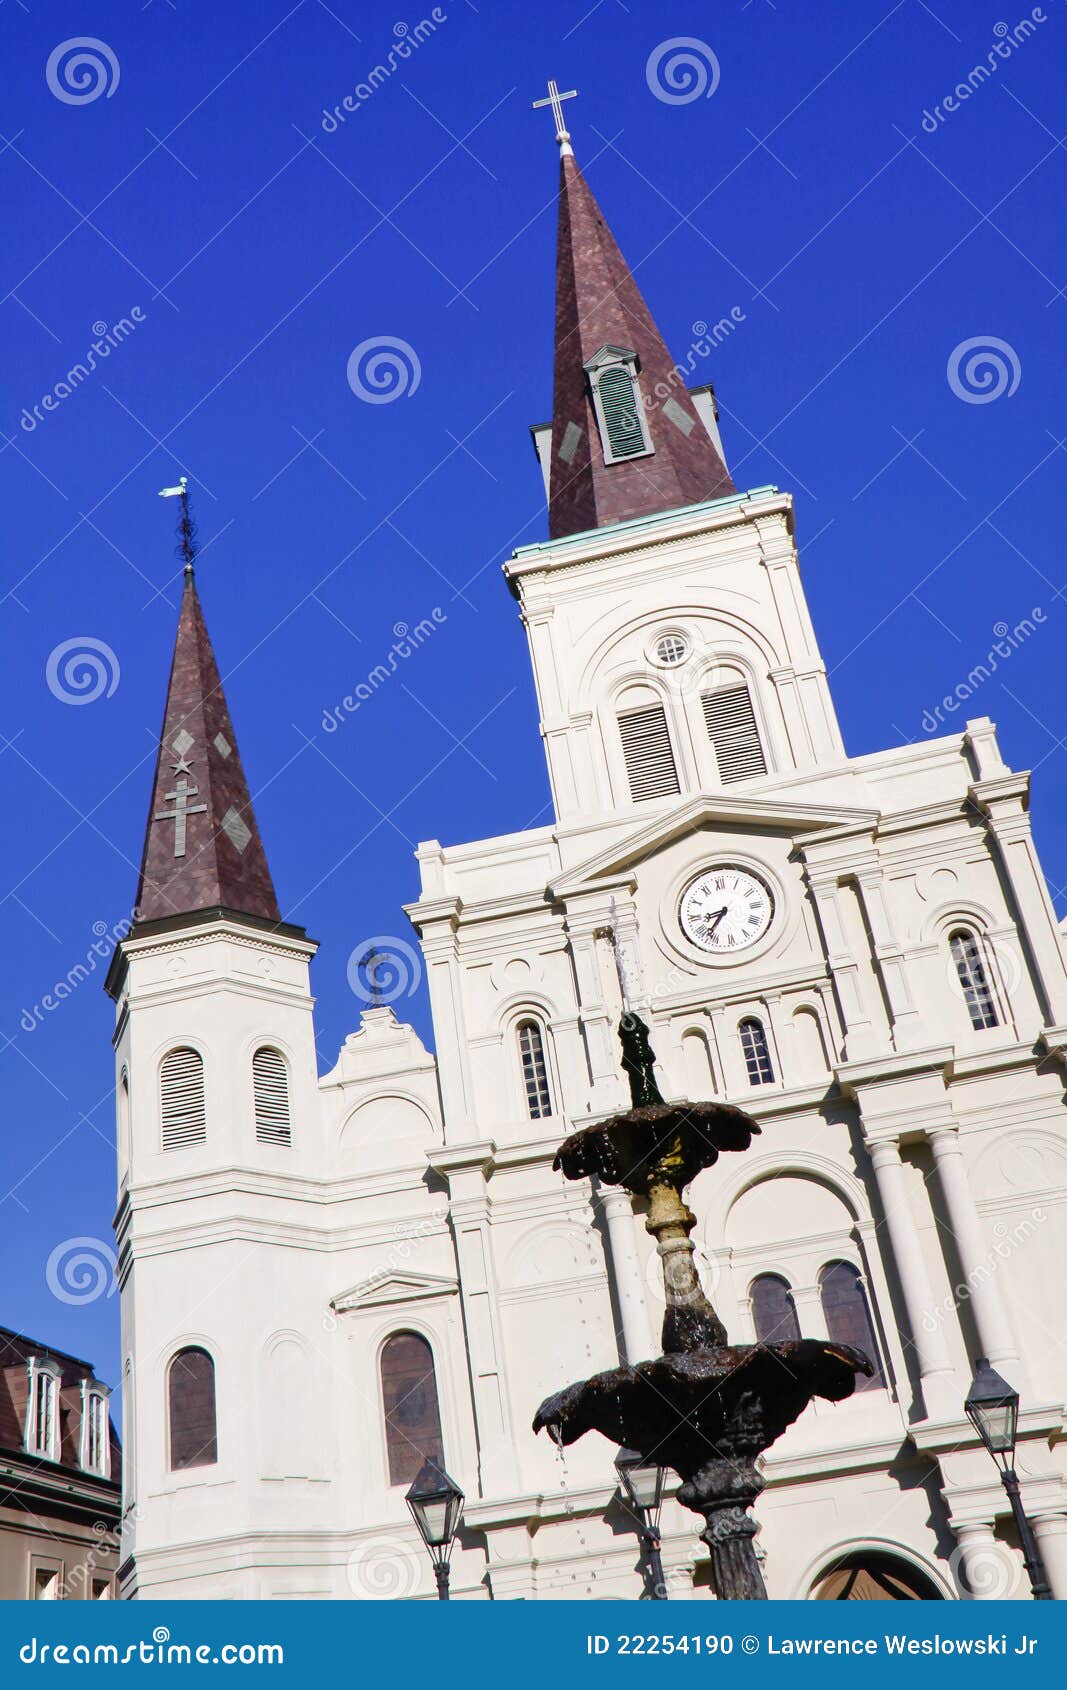 New Orleans St Louis Cathedral And Fountain Editorial Image - Image of jackson, city: 22254190